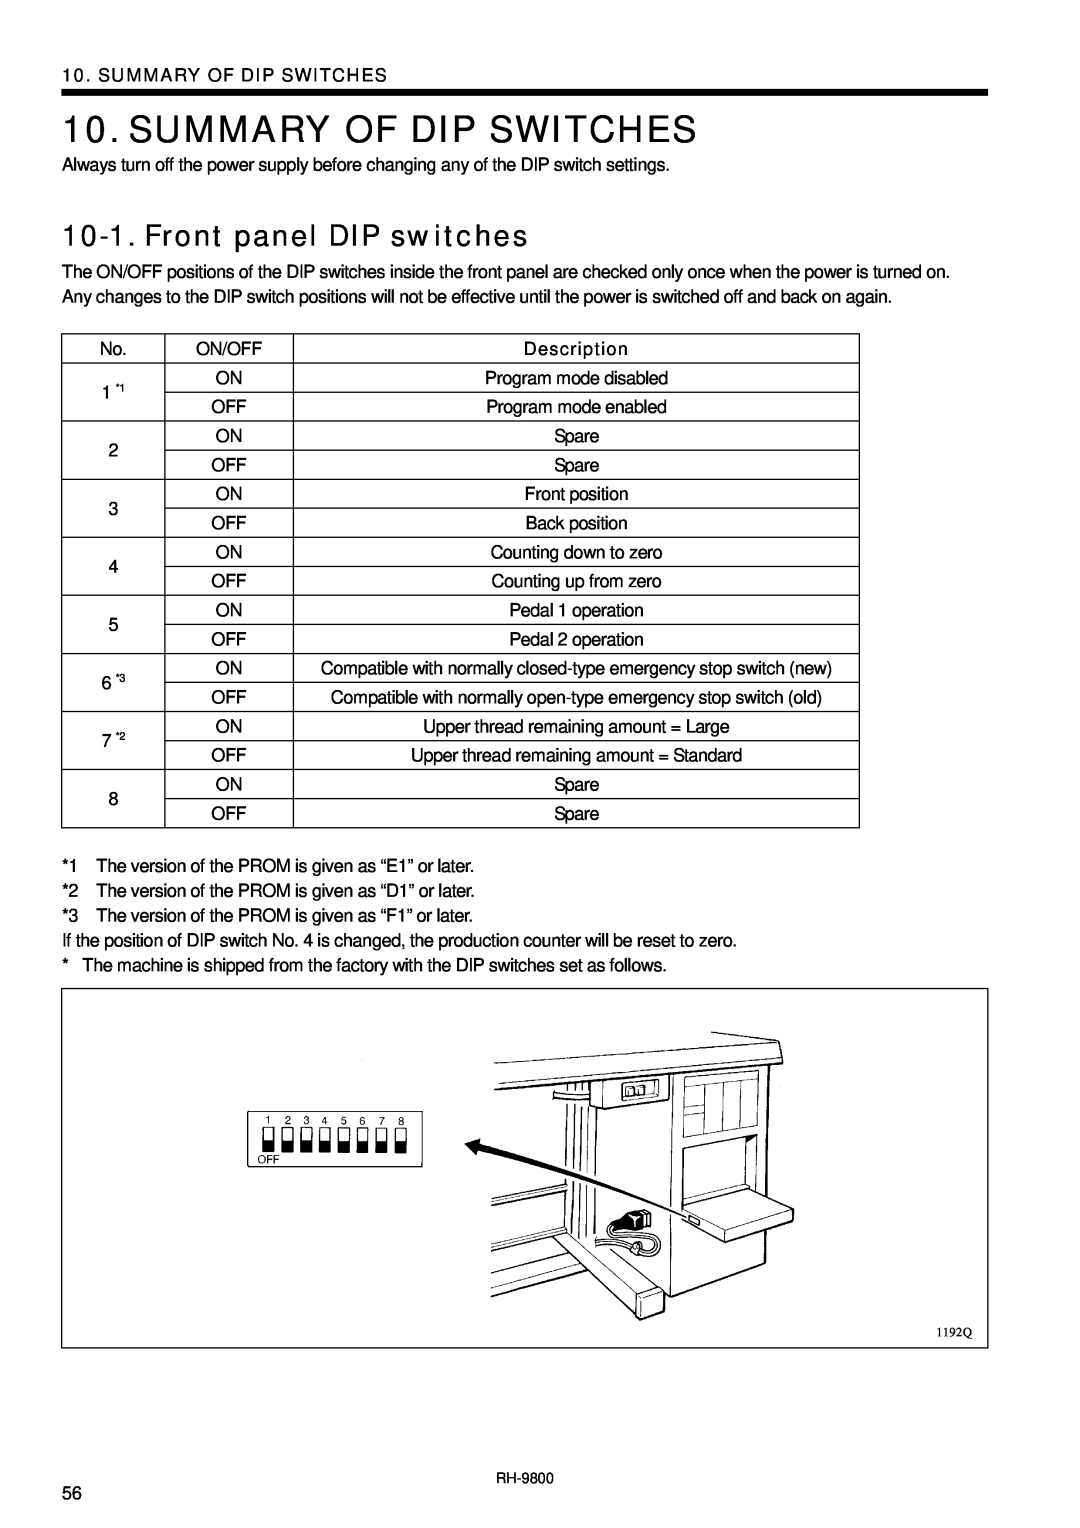 Brother DH4-B980 instruction manual Summary Of Dip Switches, Front panel DIP switches 